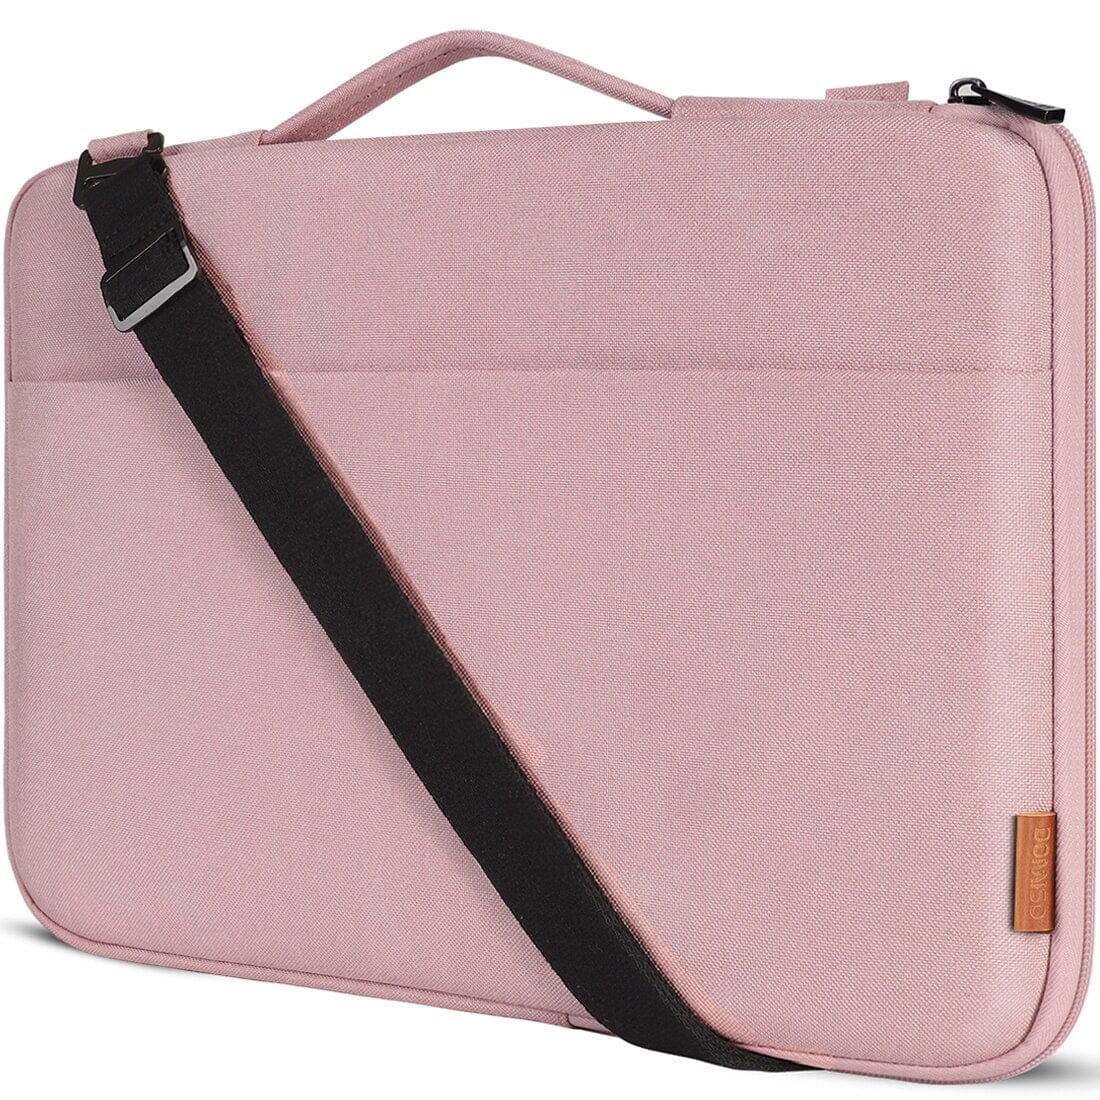 Laptop Messenger Bag 15.6 inch The Store Bags Pink 15.6-inch 